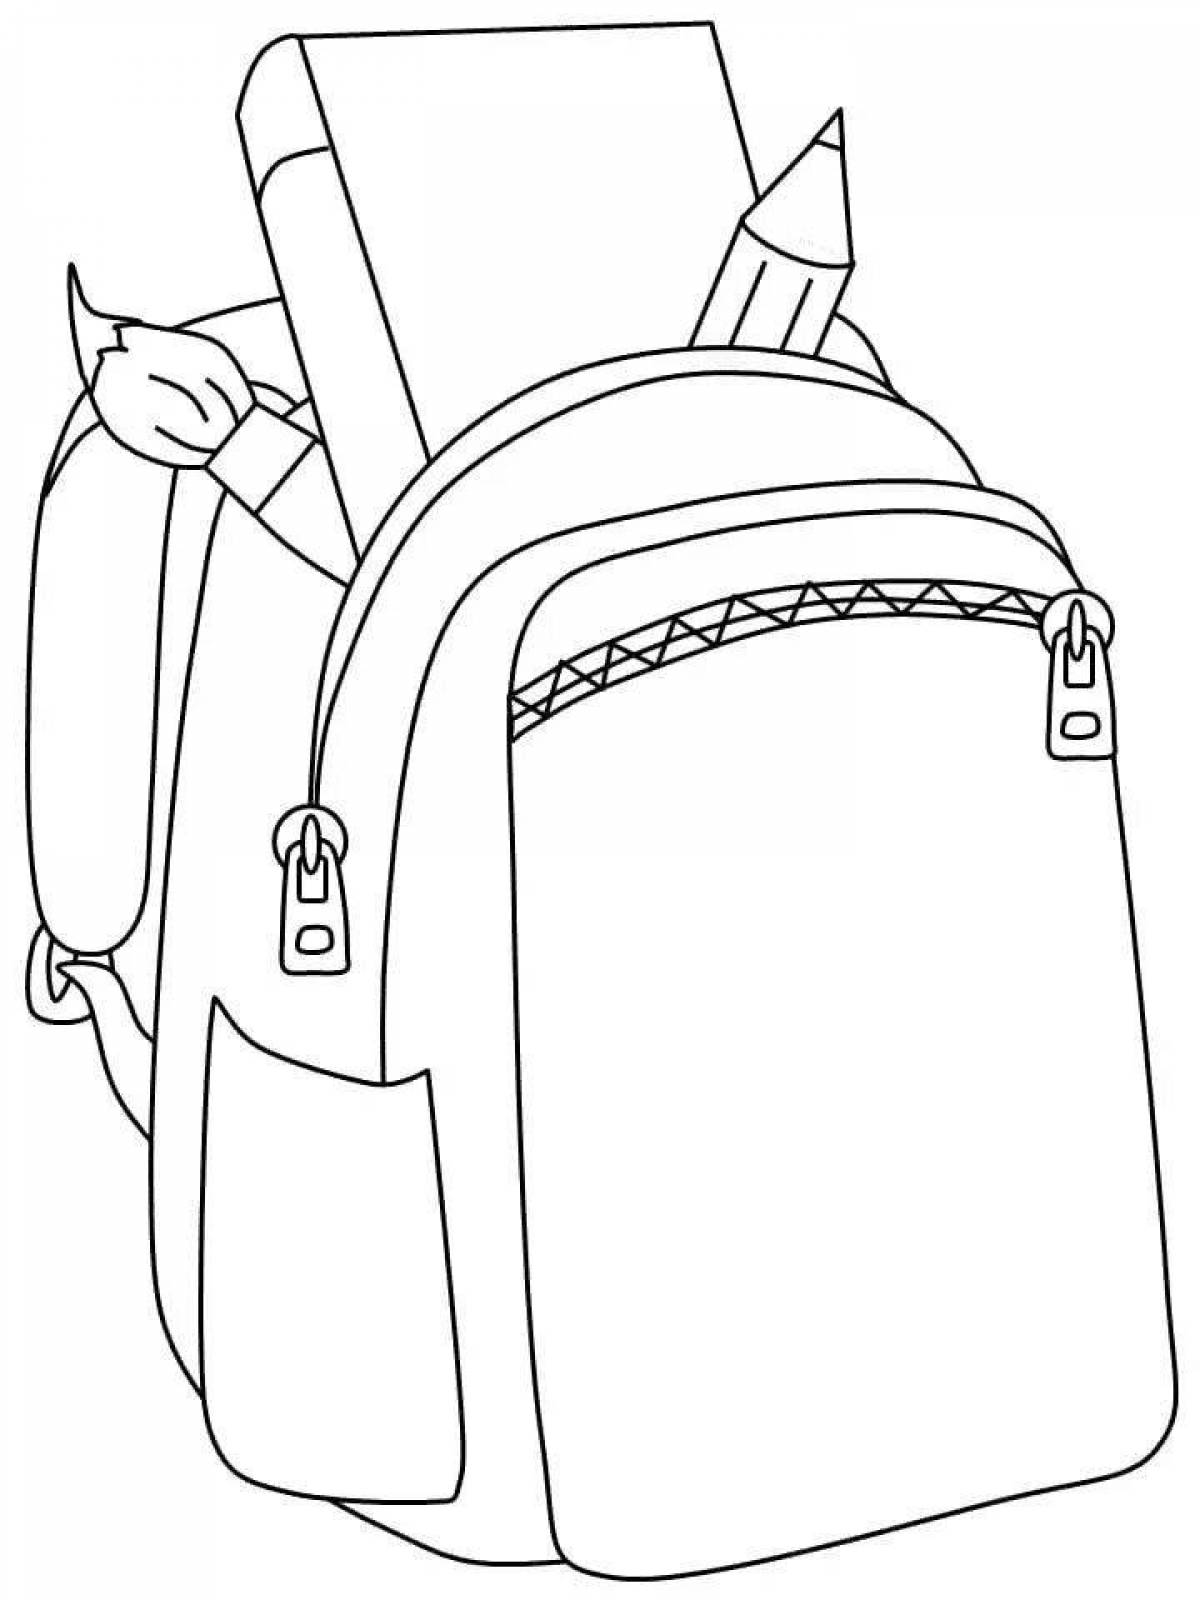 Coloring book nice backpack for kids